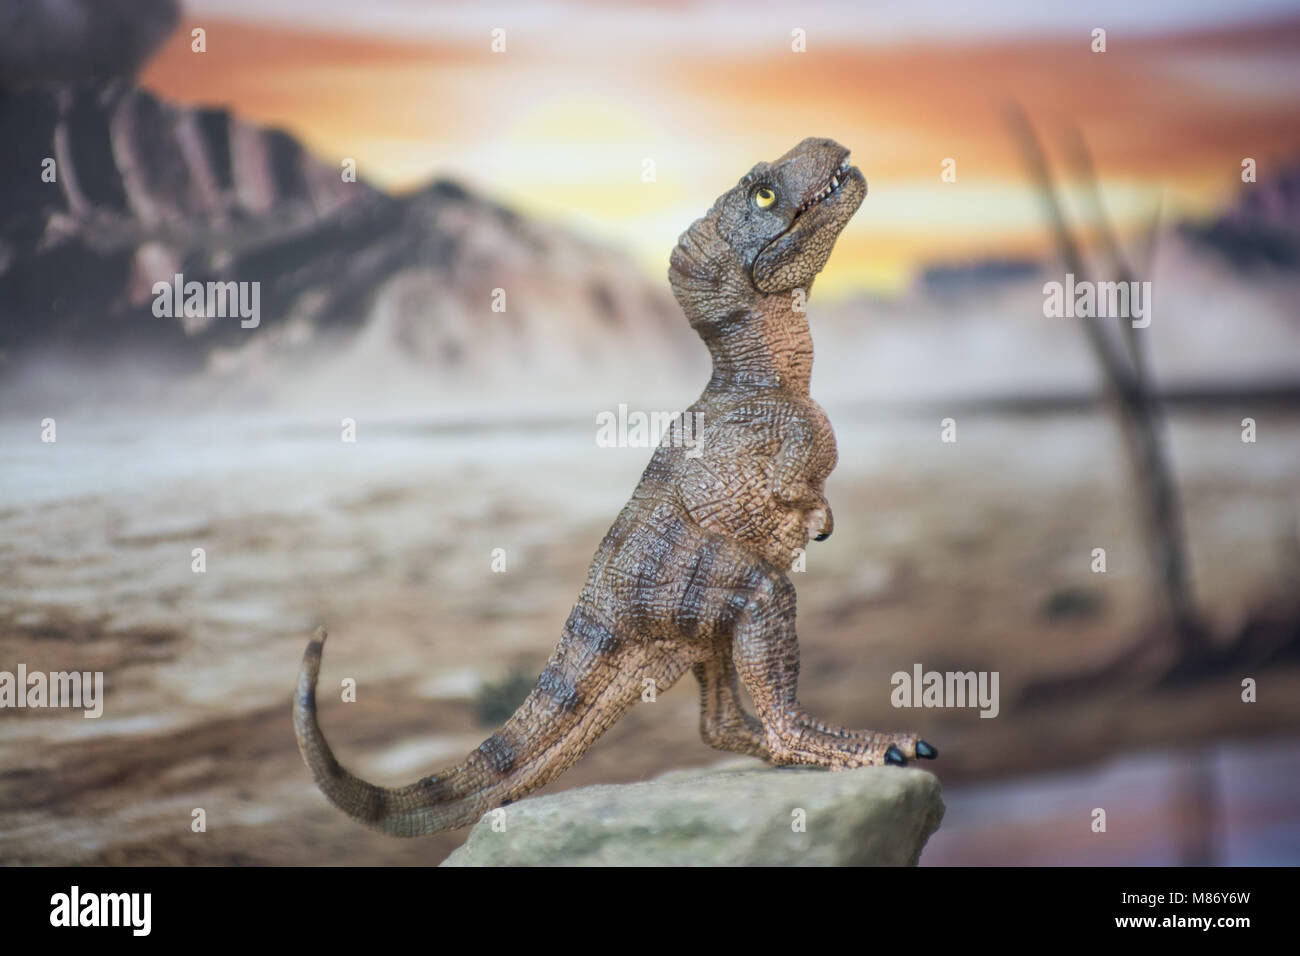 Jurassic World Images – Browse 7,751 Stock Photos, Vectors, and Video